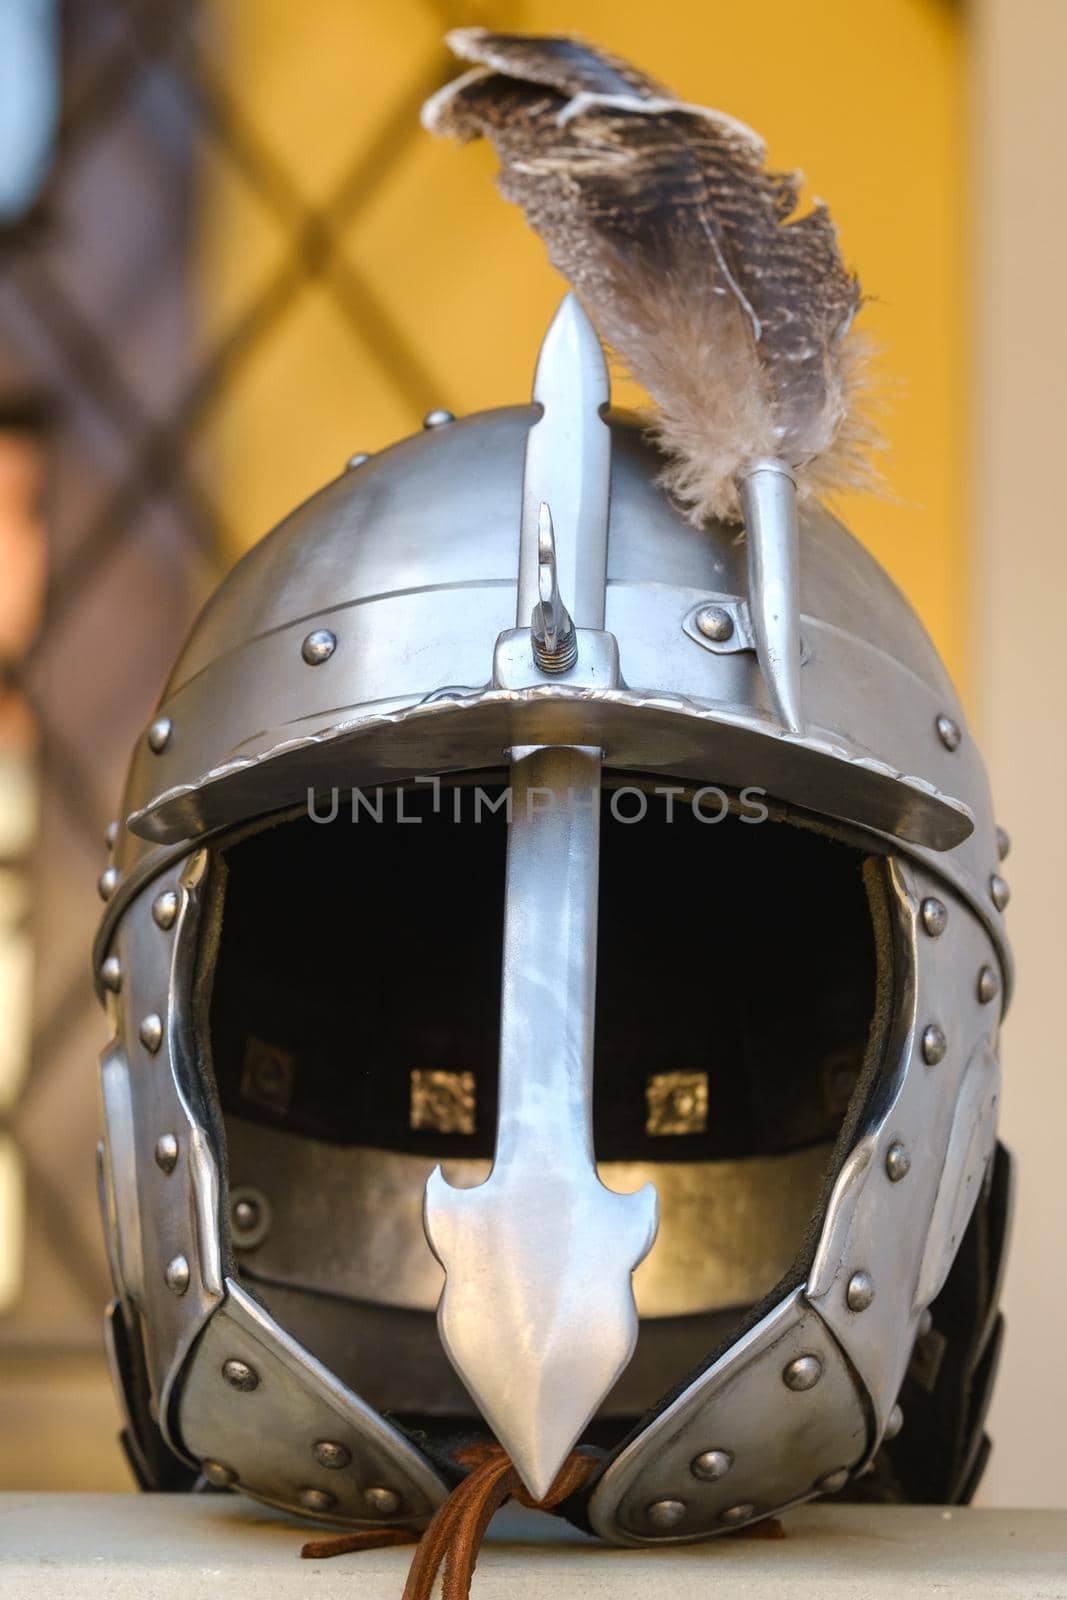 An ancient knight's helmet with a feather .Medieval concept by Lobachad